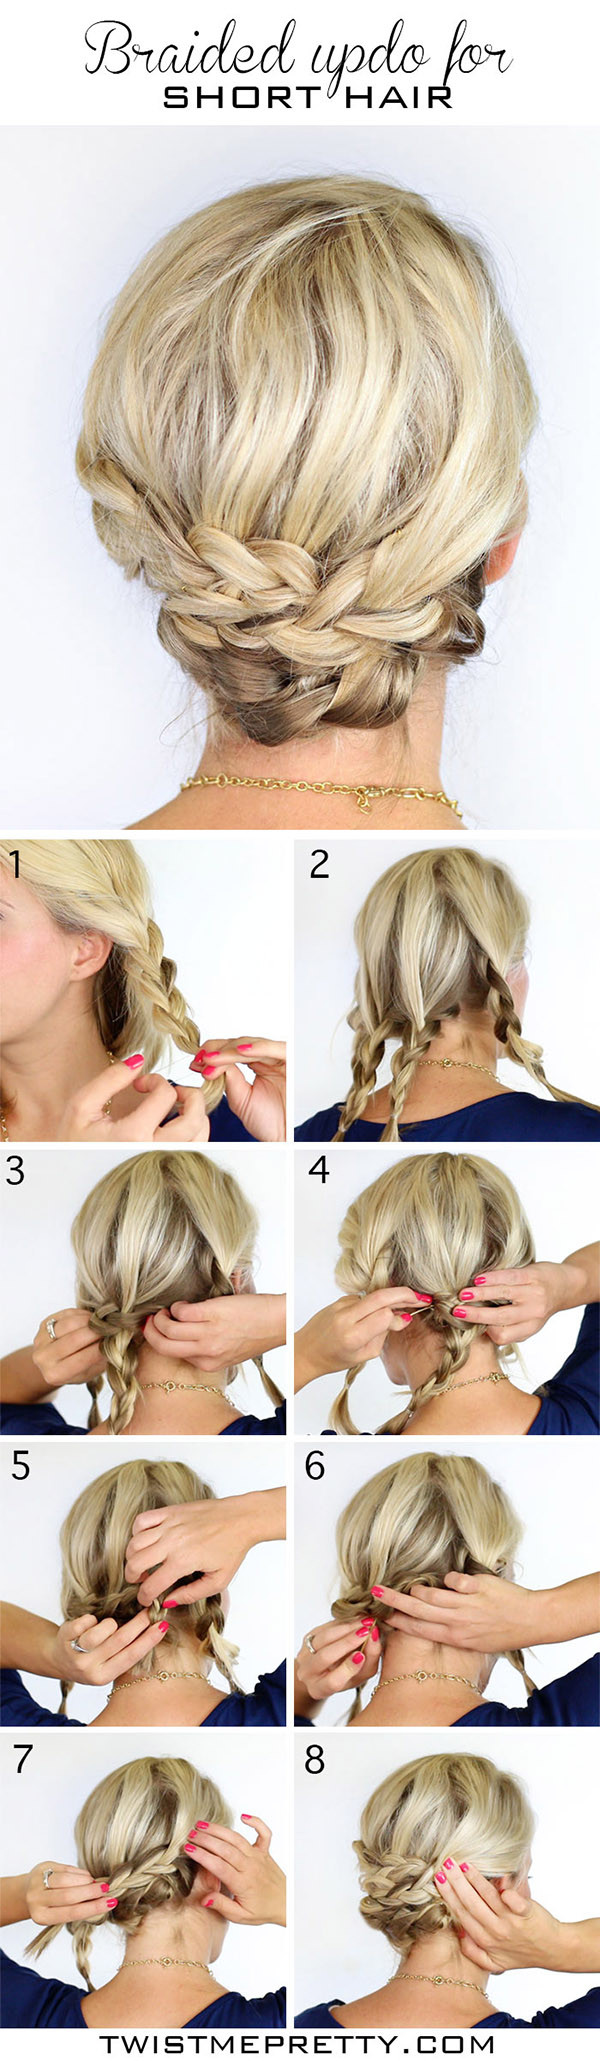 Easy Wedding Hairstyles For Short Hair
 20 DIY Wedding Hairstyles With Tutorials To Try Your Own